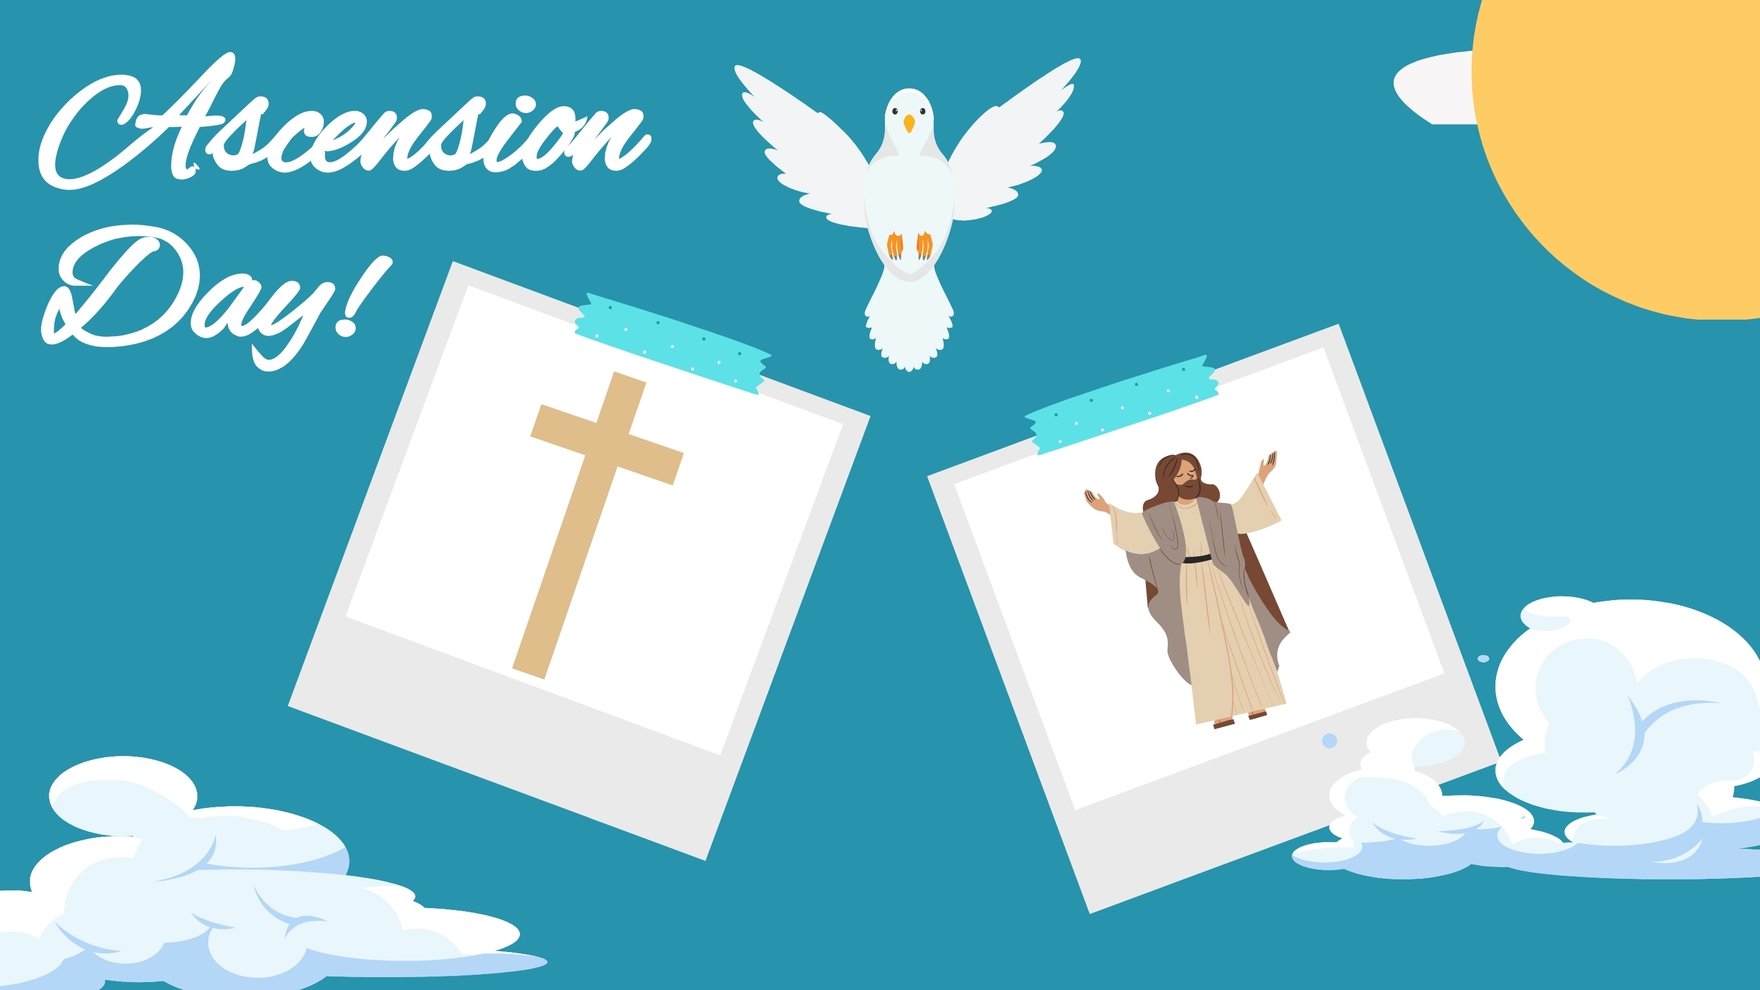 Free Ascension Day Image Background